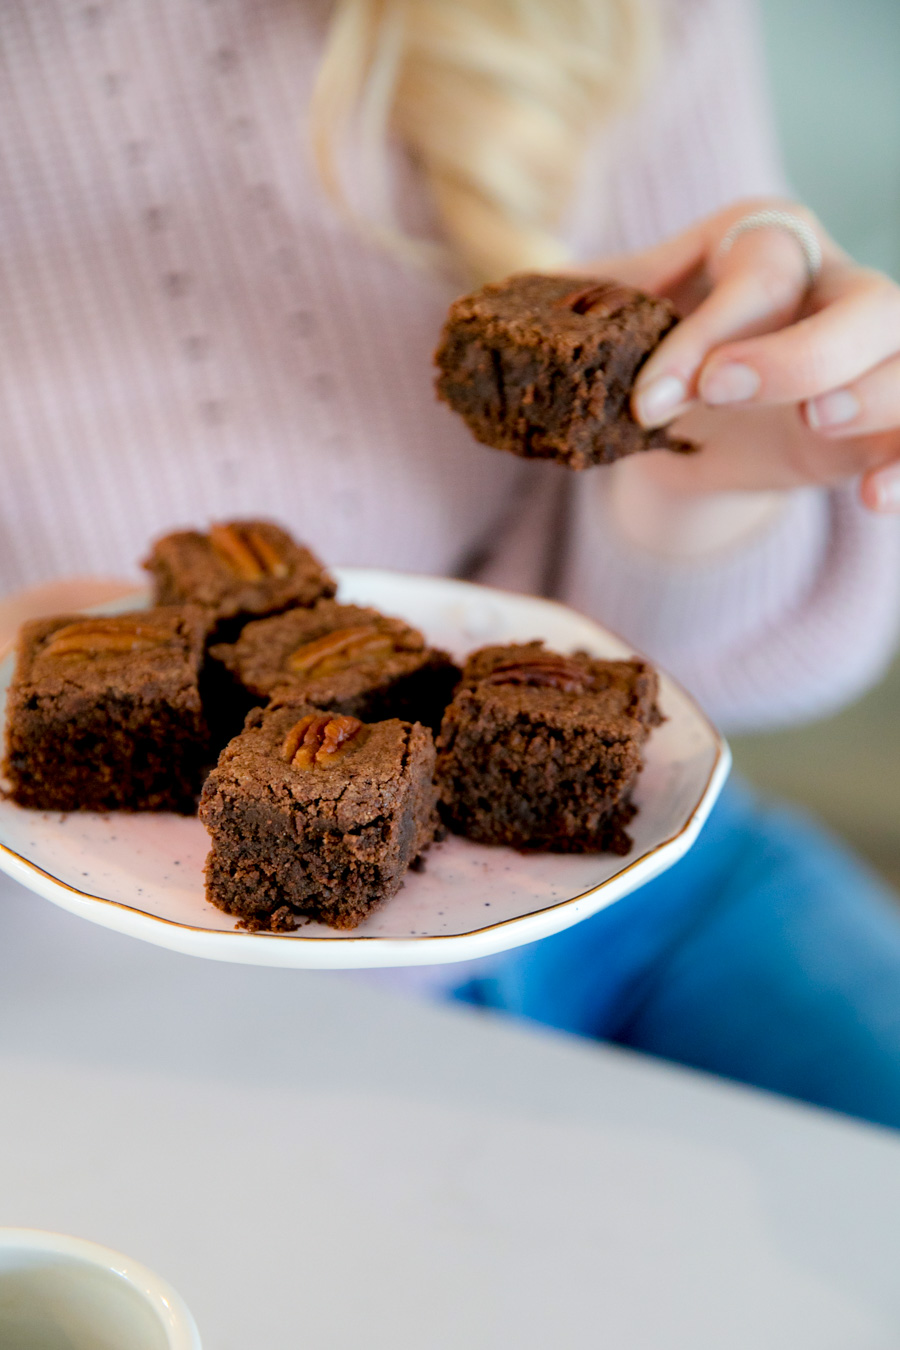 Best Cakey Brownies - Brownie Recipe with Cocoa Powder